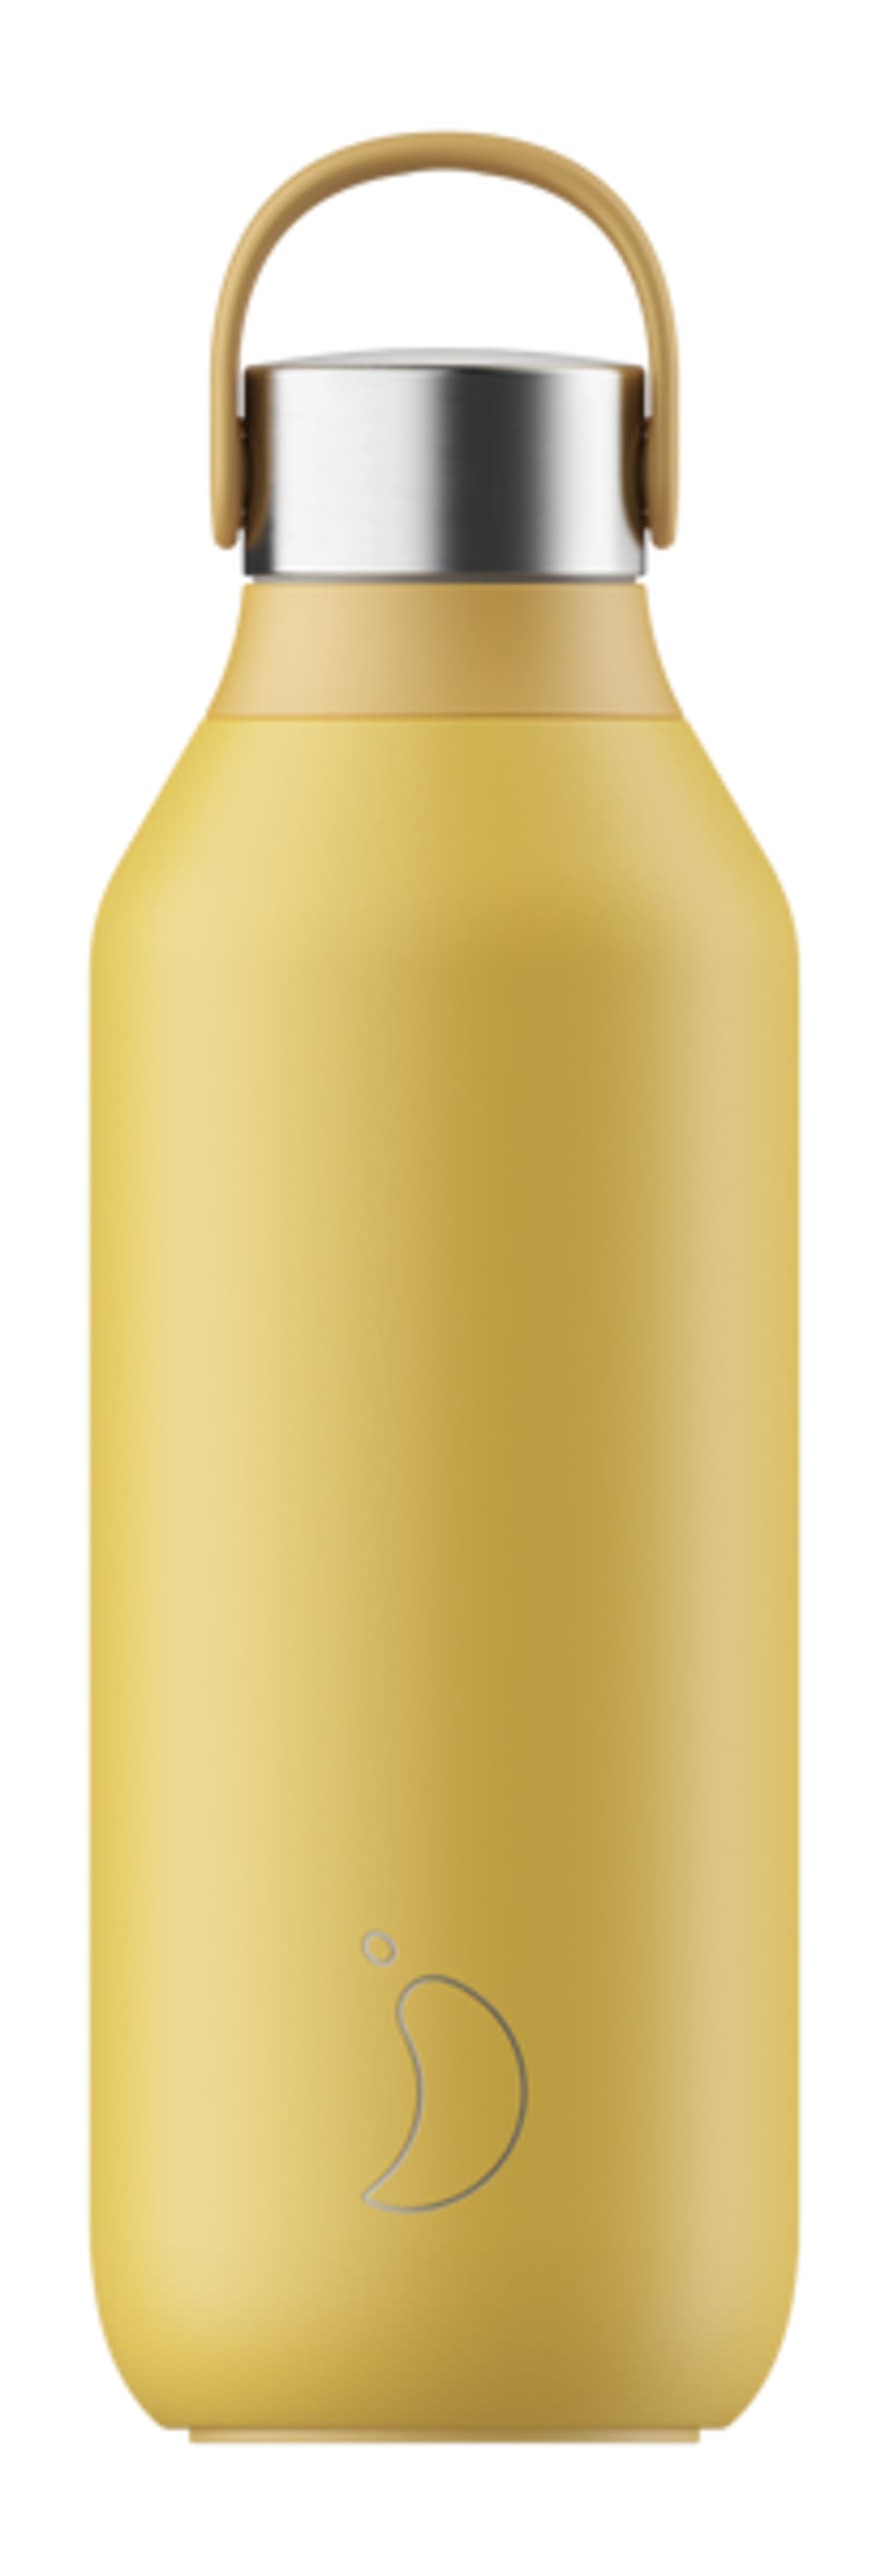 Chilly's Bottle Series 2 500ml Pollen Yellow